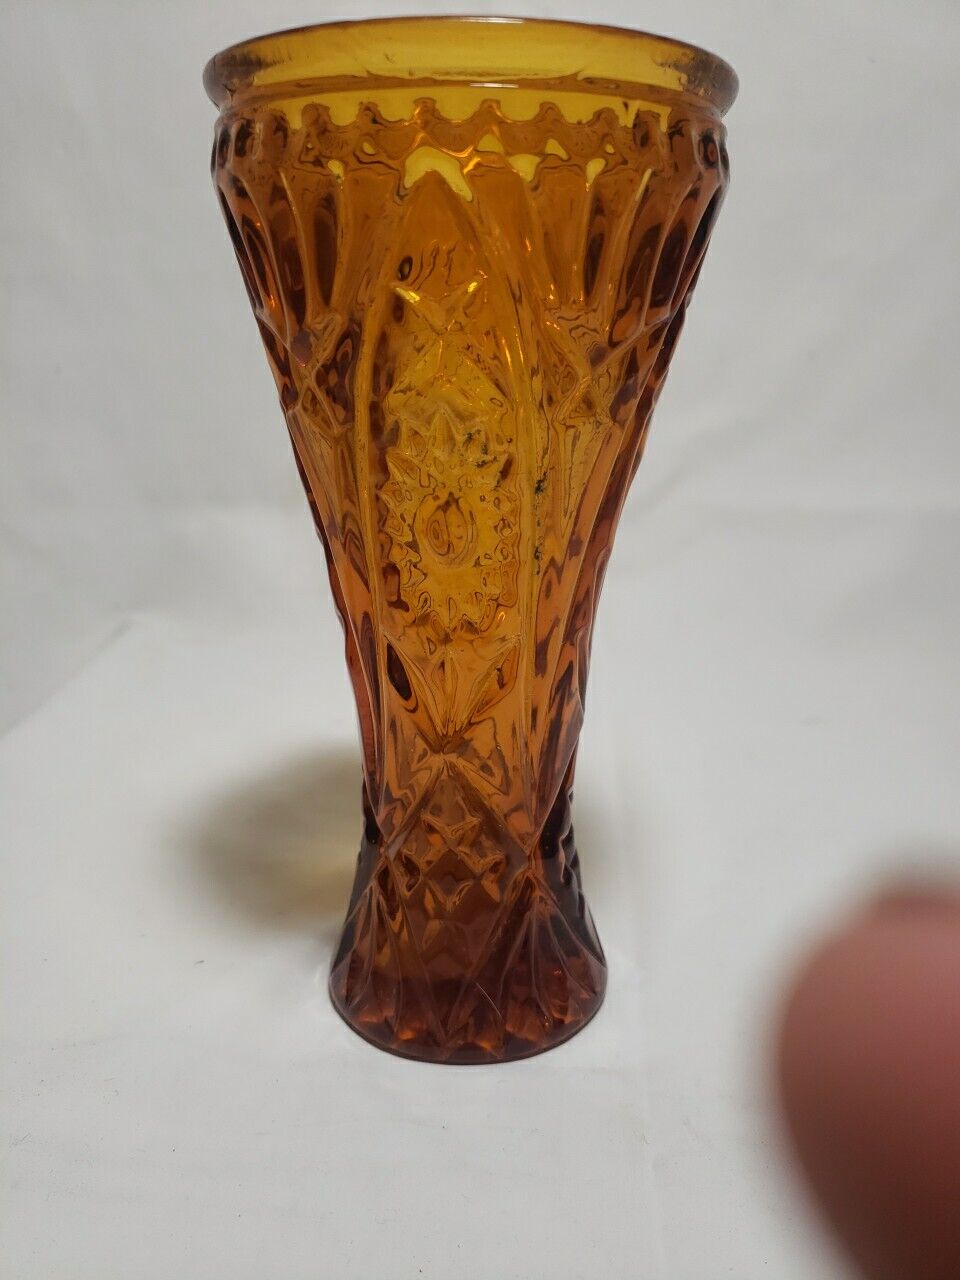 Vintage 6.5” Amber Colored Cut Glass Vase Great Detail and Design